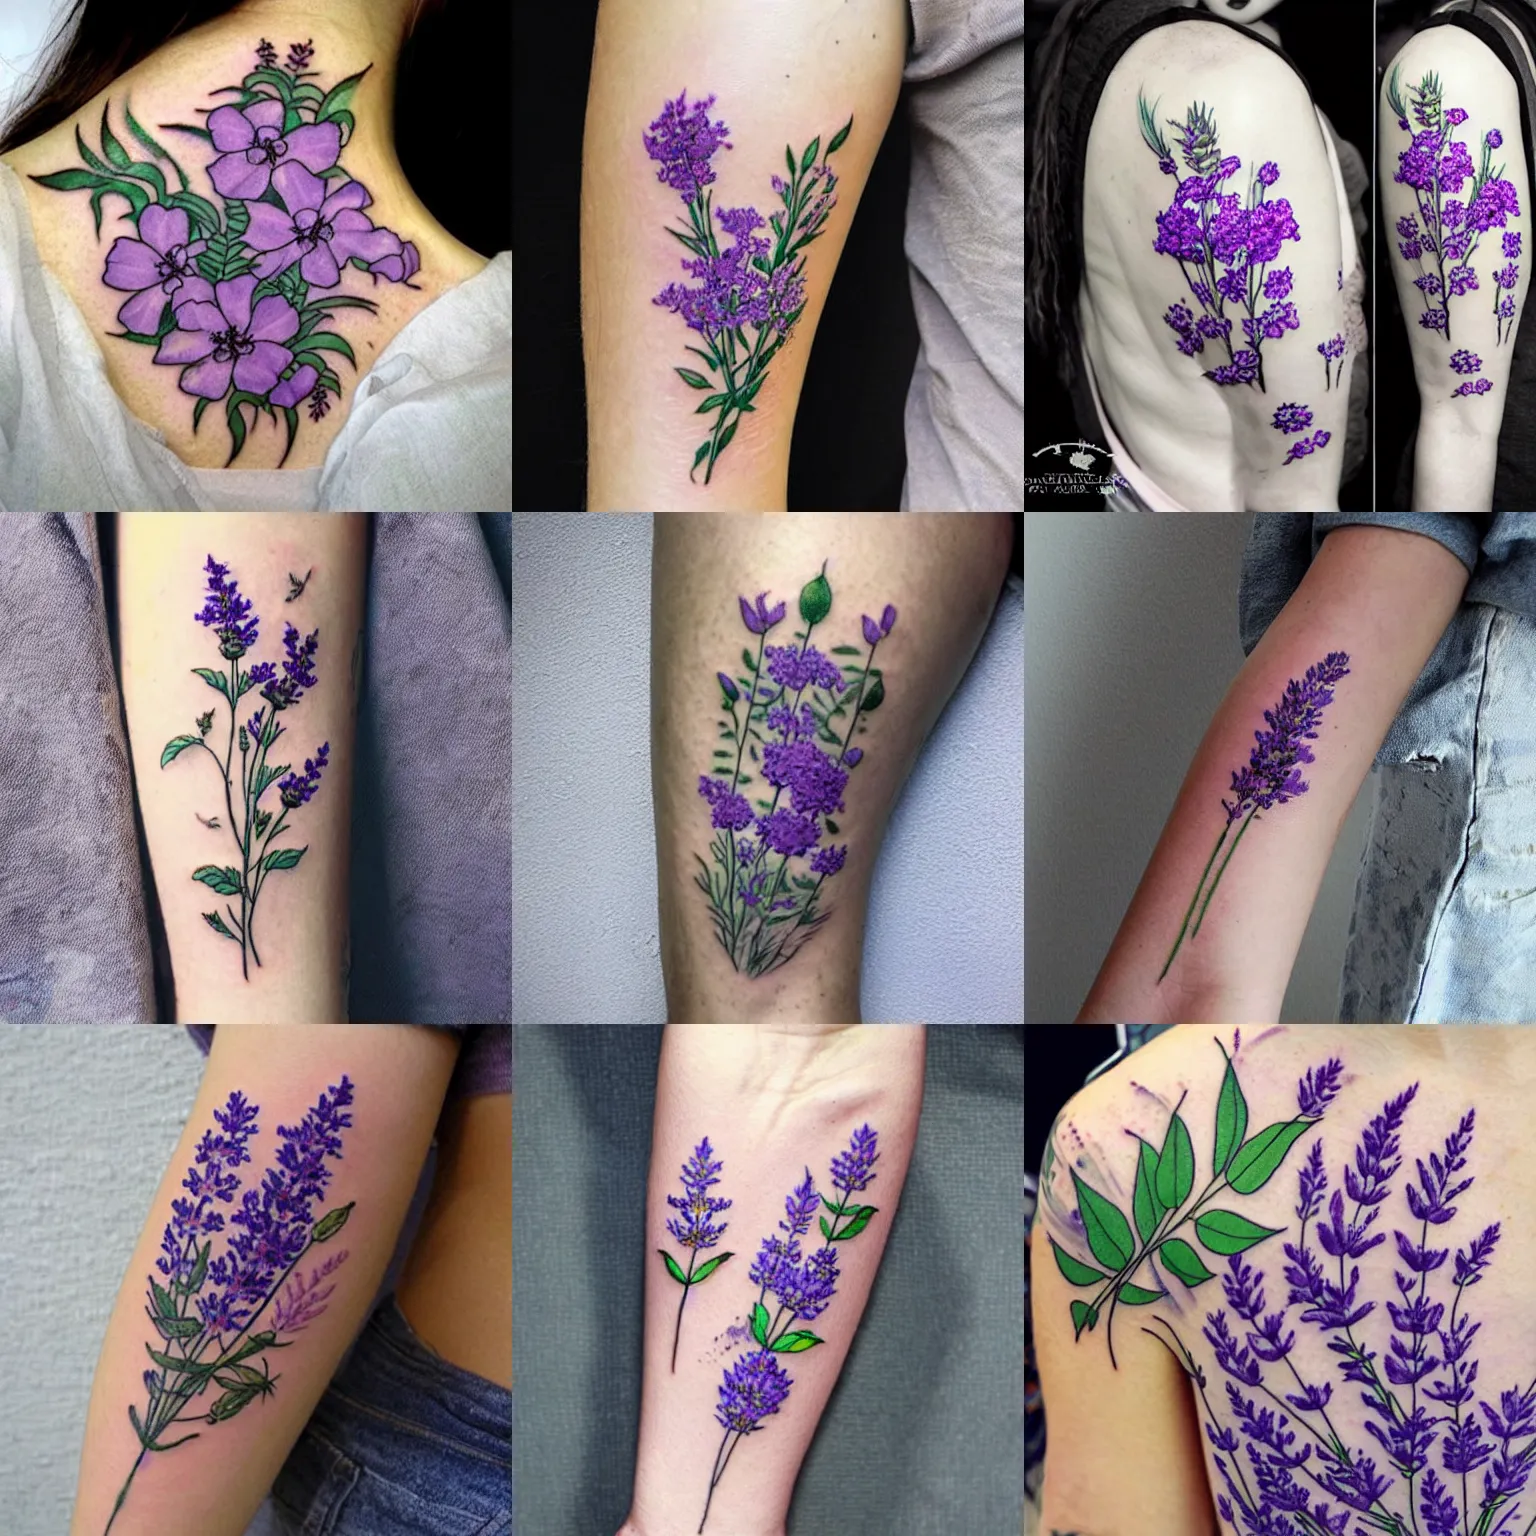 Drew a Lavender, Rosemary and Jasmines for a tattoo design, what do you  think? : r/flowers